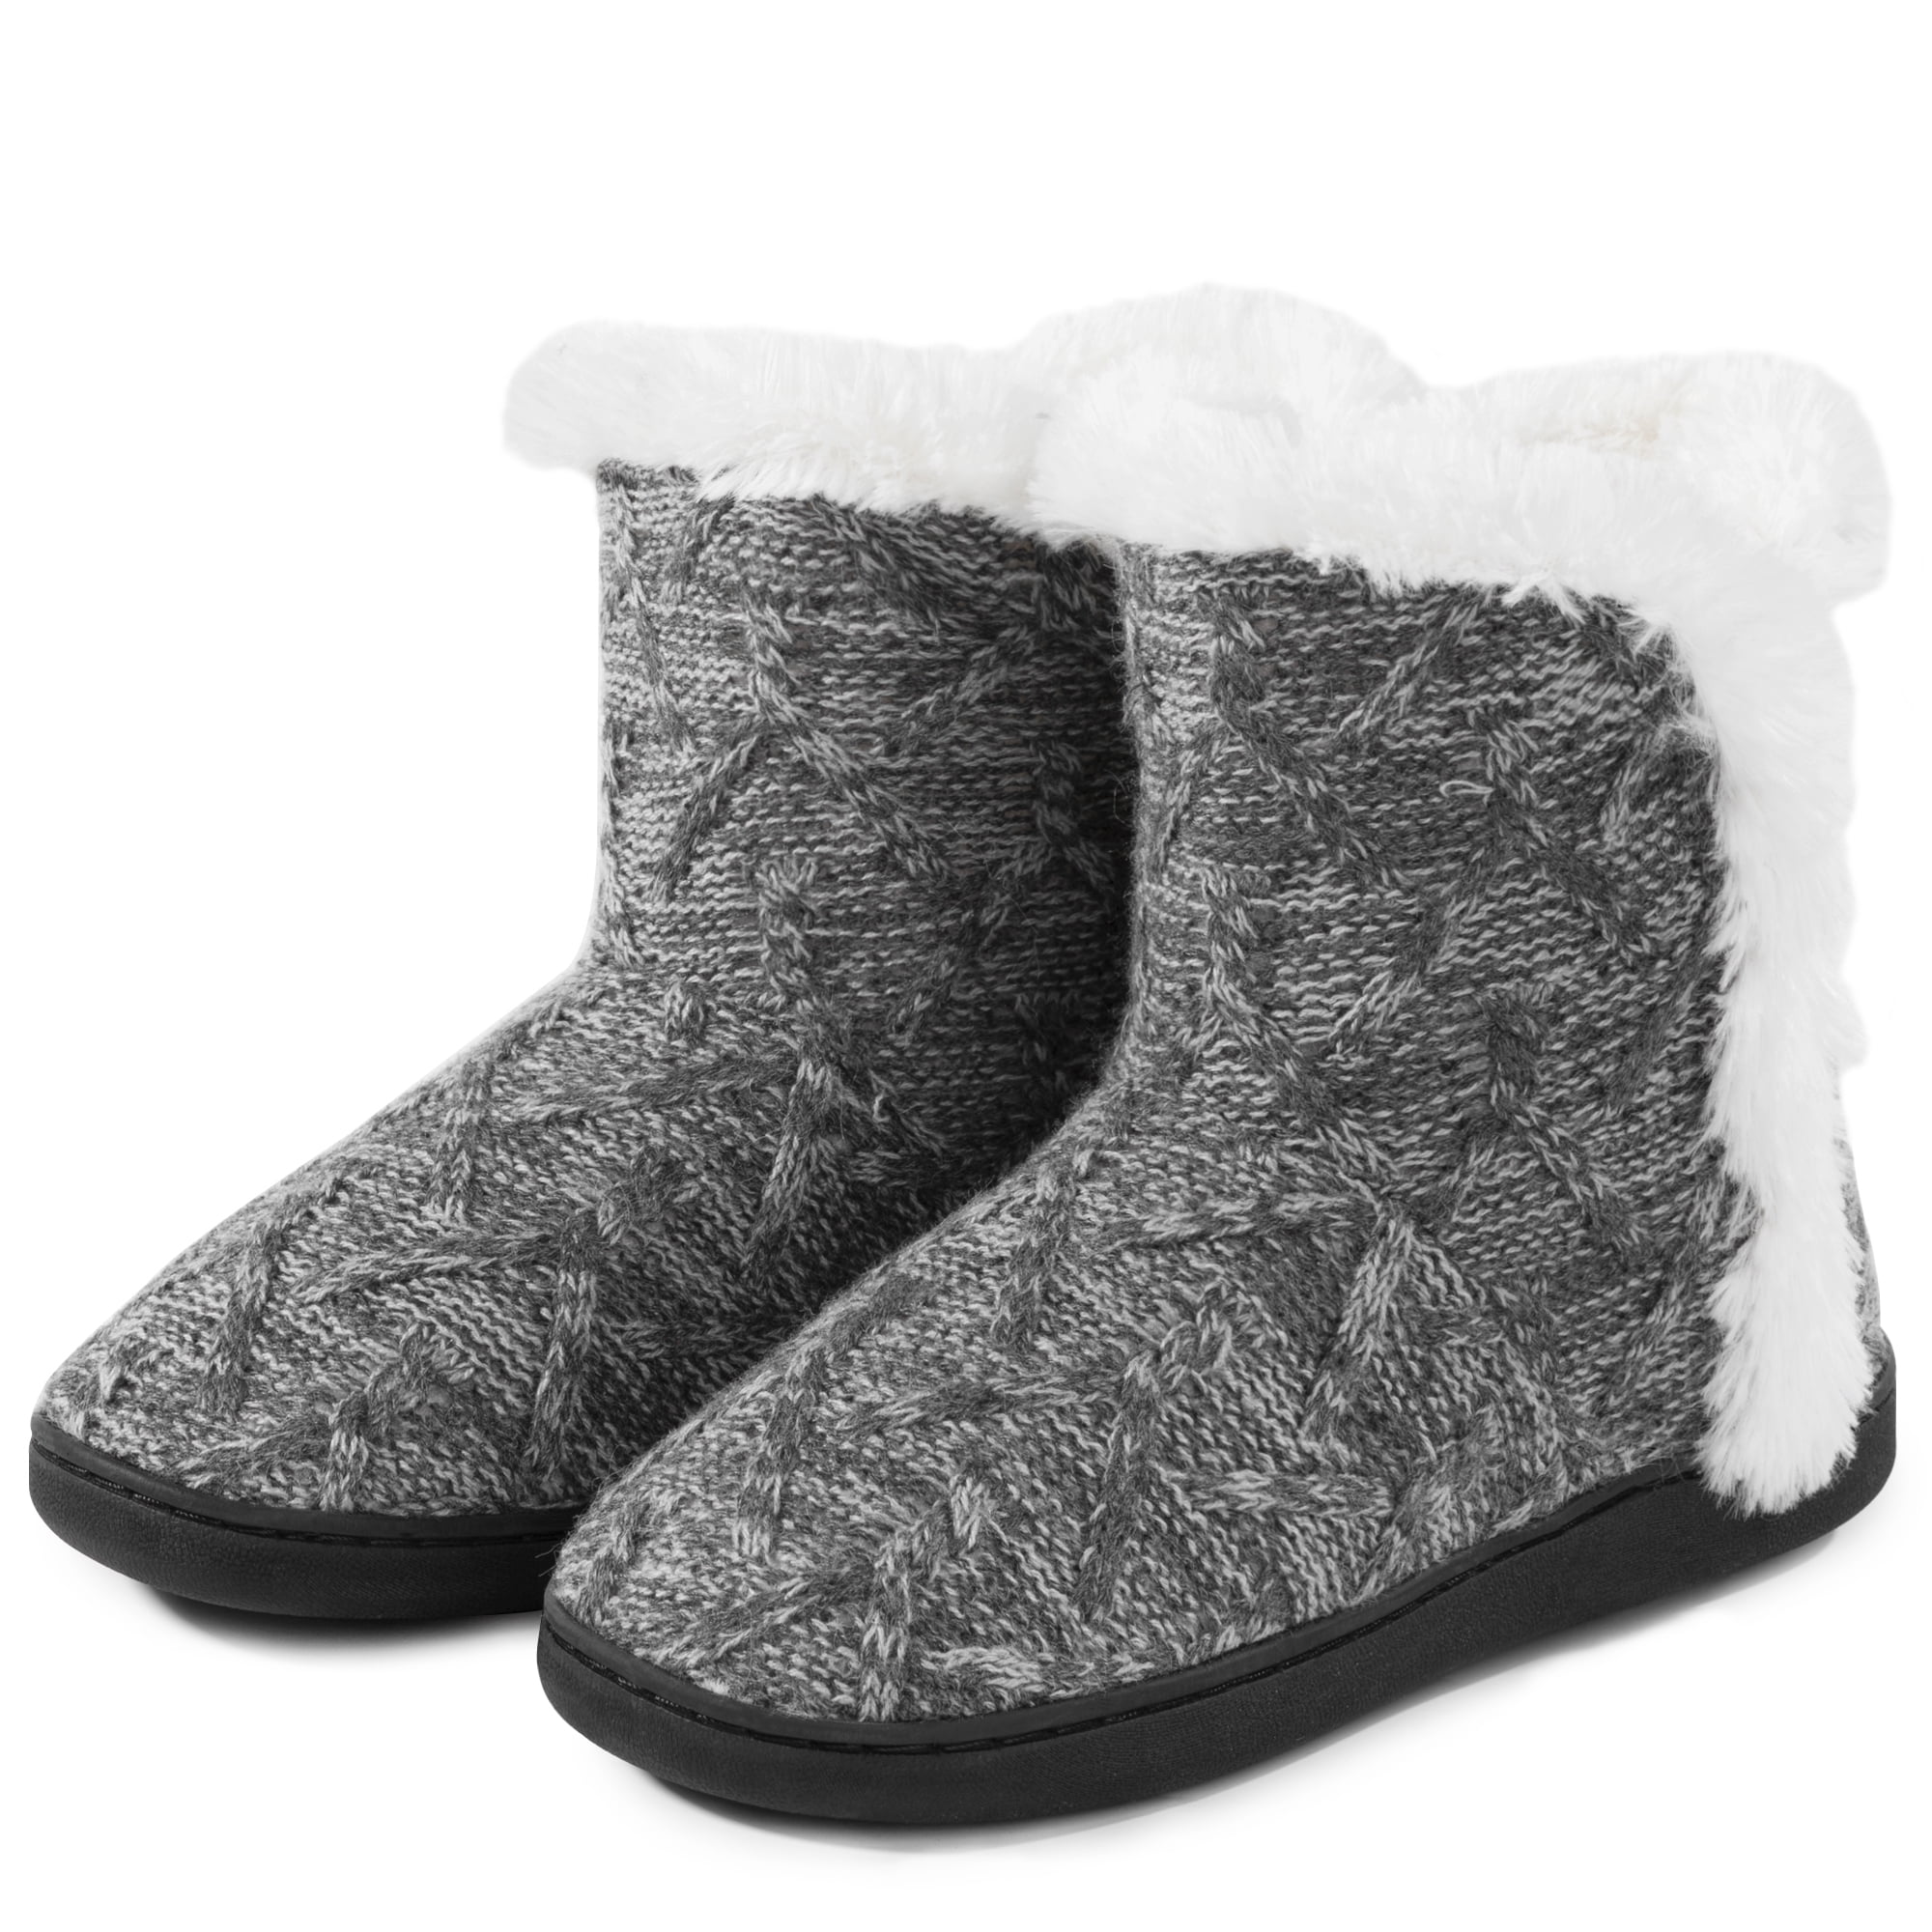 HOMEHOT Womens Bootie Slippers Warm Fluffy Faux Fur Slippers Memory ...